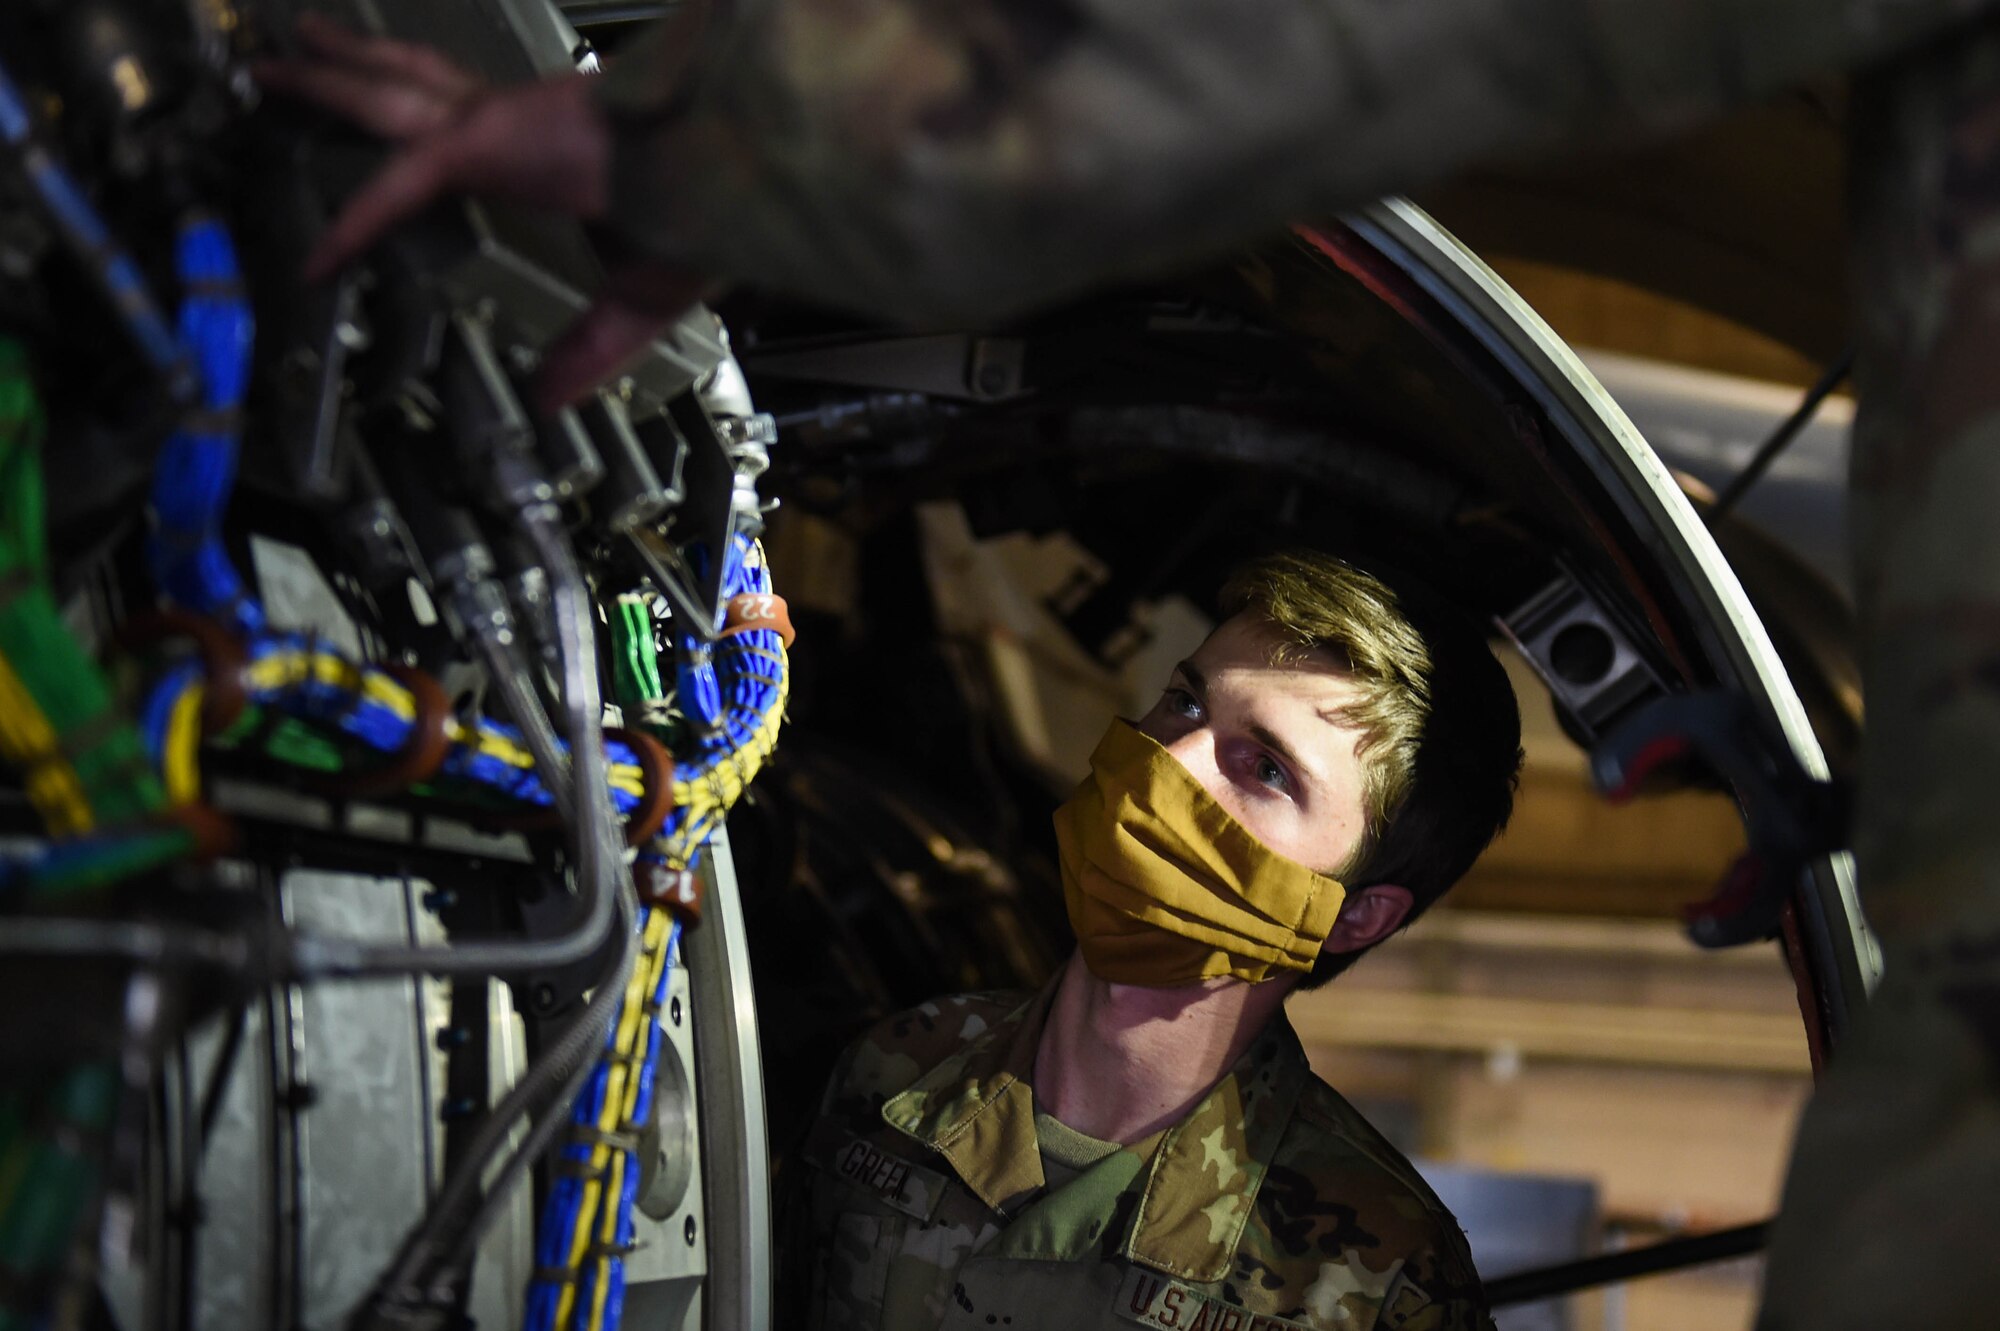 Airman 1st Class Jerrert Green receives training from Staff Sgt. Jonathan Daniels, both 62nd Maintenance Squadron jet mechanics, on the engine of a C-17 Globemaster III on Joint Base Lewis-McChord (JBLM), Wash., May 20, 2020. Airmen have still arrived to their first duty stations during the COVID-19 pandemic and units at JBLM have made it a priority to make sure they are integrated into their new units and start receiving training. (U.S. Air Force photo by Airman 1st Class Mikayla Heineck)